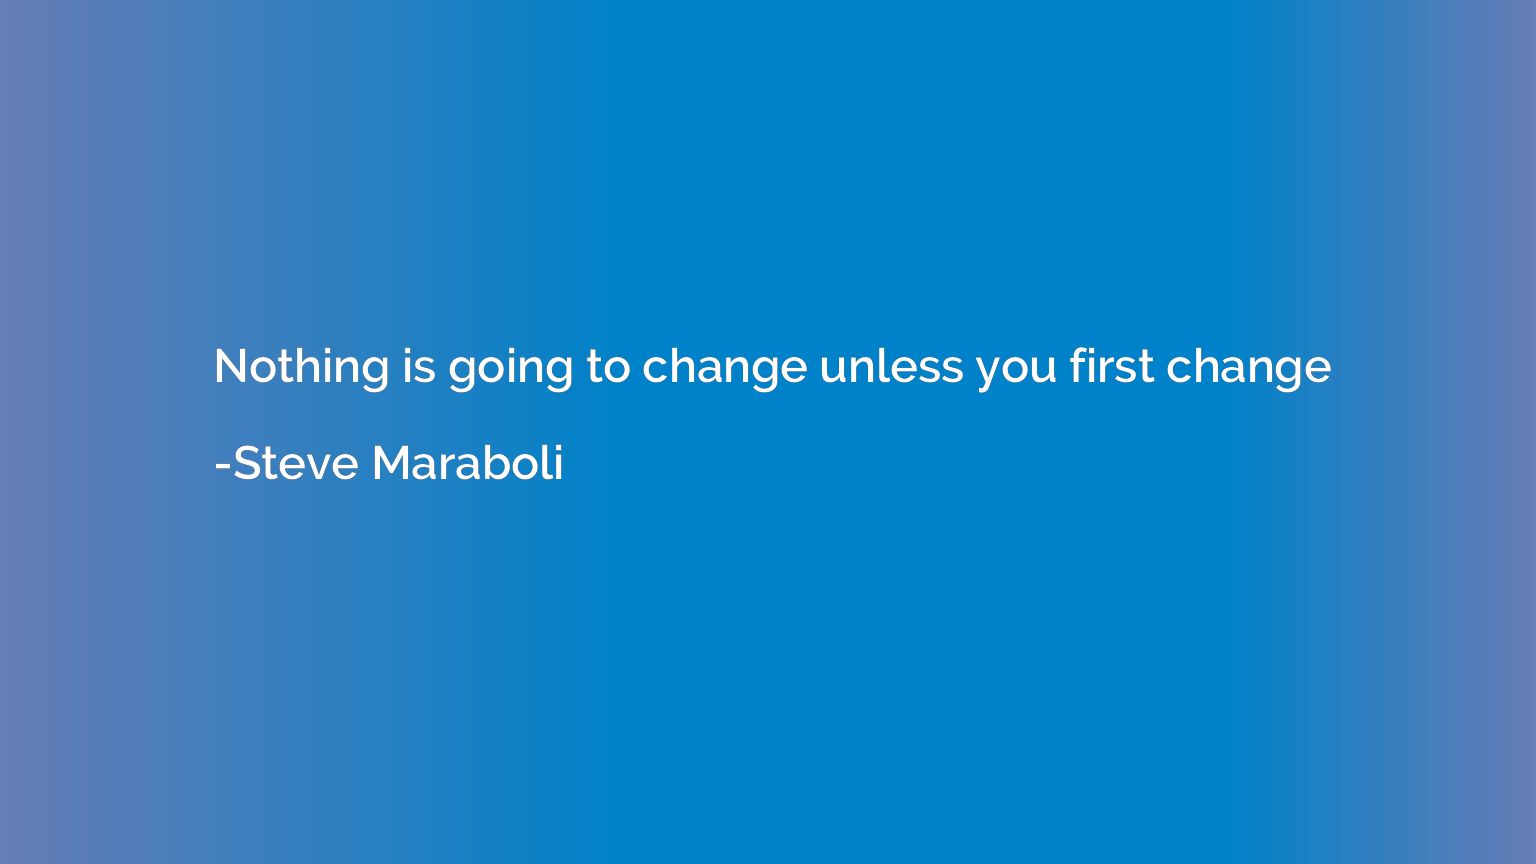 Nothing is going to change unless you first change